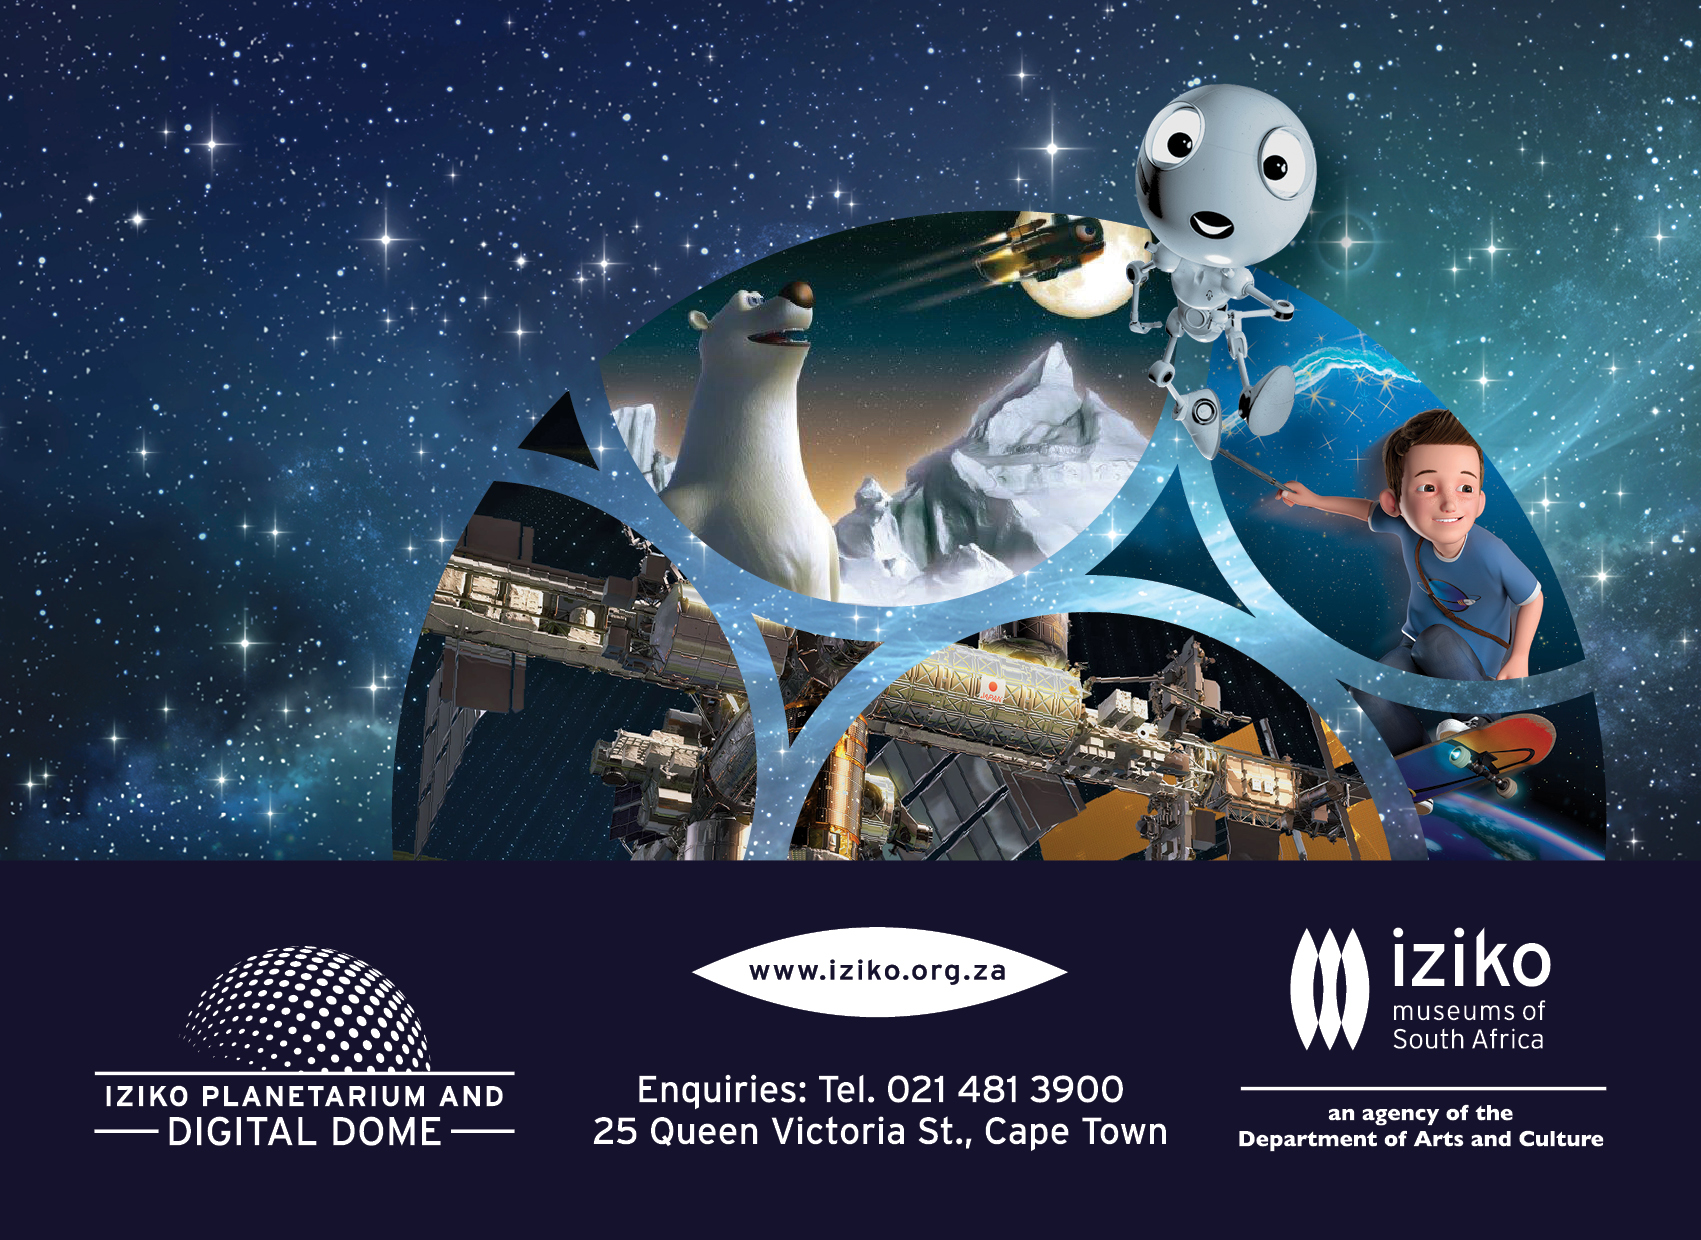 Enter to WIN 2 x tickets for the Iziko Planetarium and the AMAZING Digital Dome @Iziko_Museums